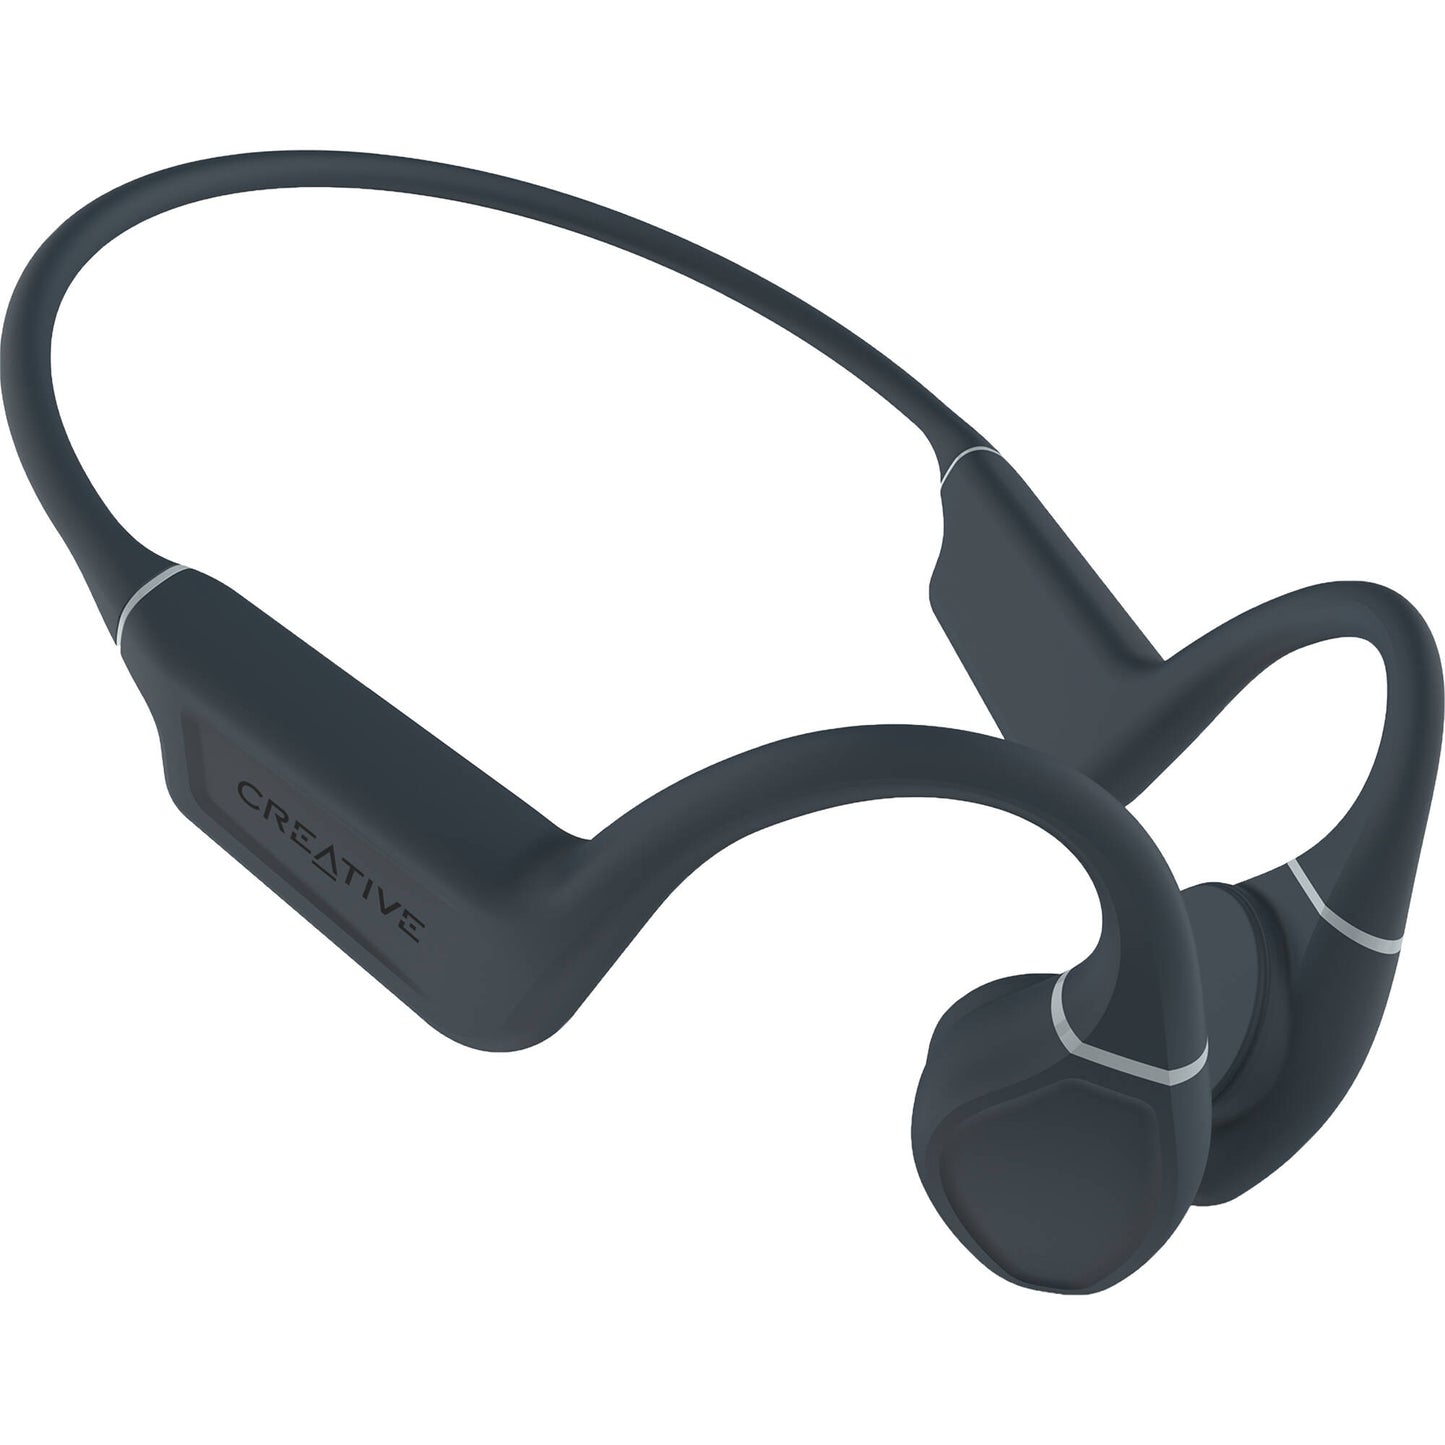 Creative Labs Creative Outlier Free Headset Wireless Neck-band Calls/Music/Sport/Everyday Bluetooth Grey